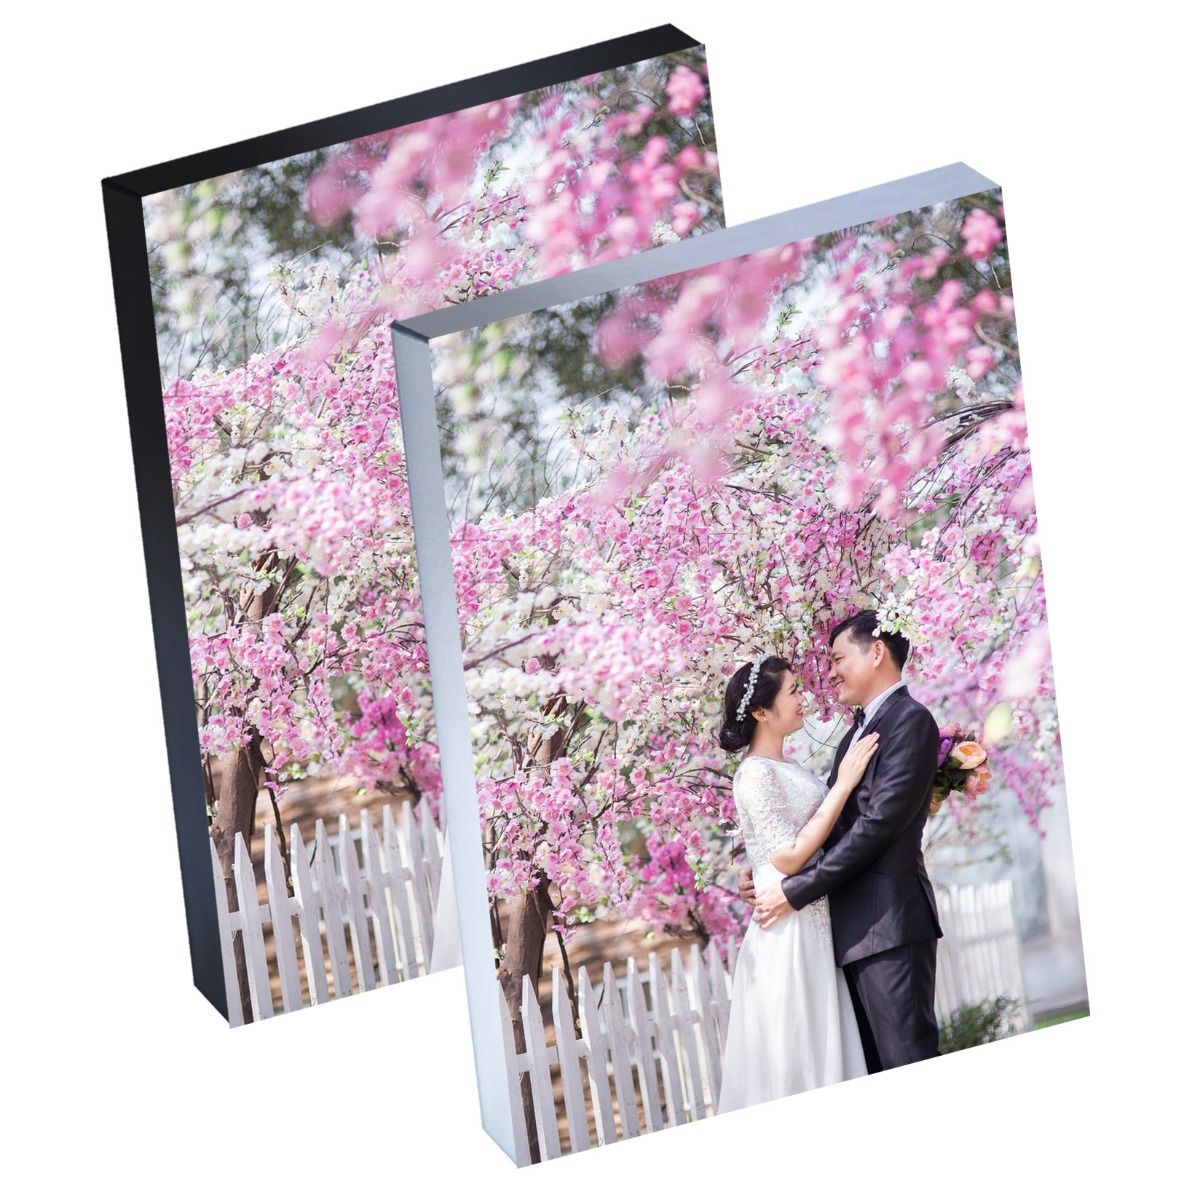 8" x 12" Silver Linings™ Peel-and-Stick Photo Block Frames, Choose from Silver or Black Edge